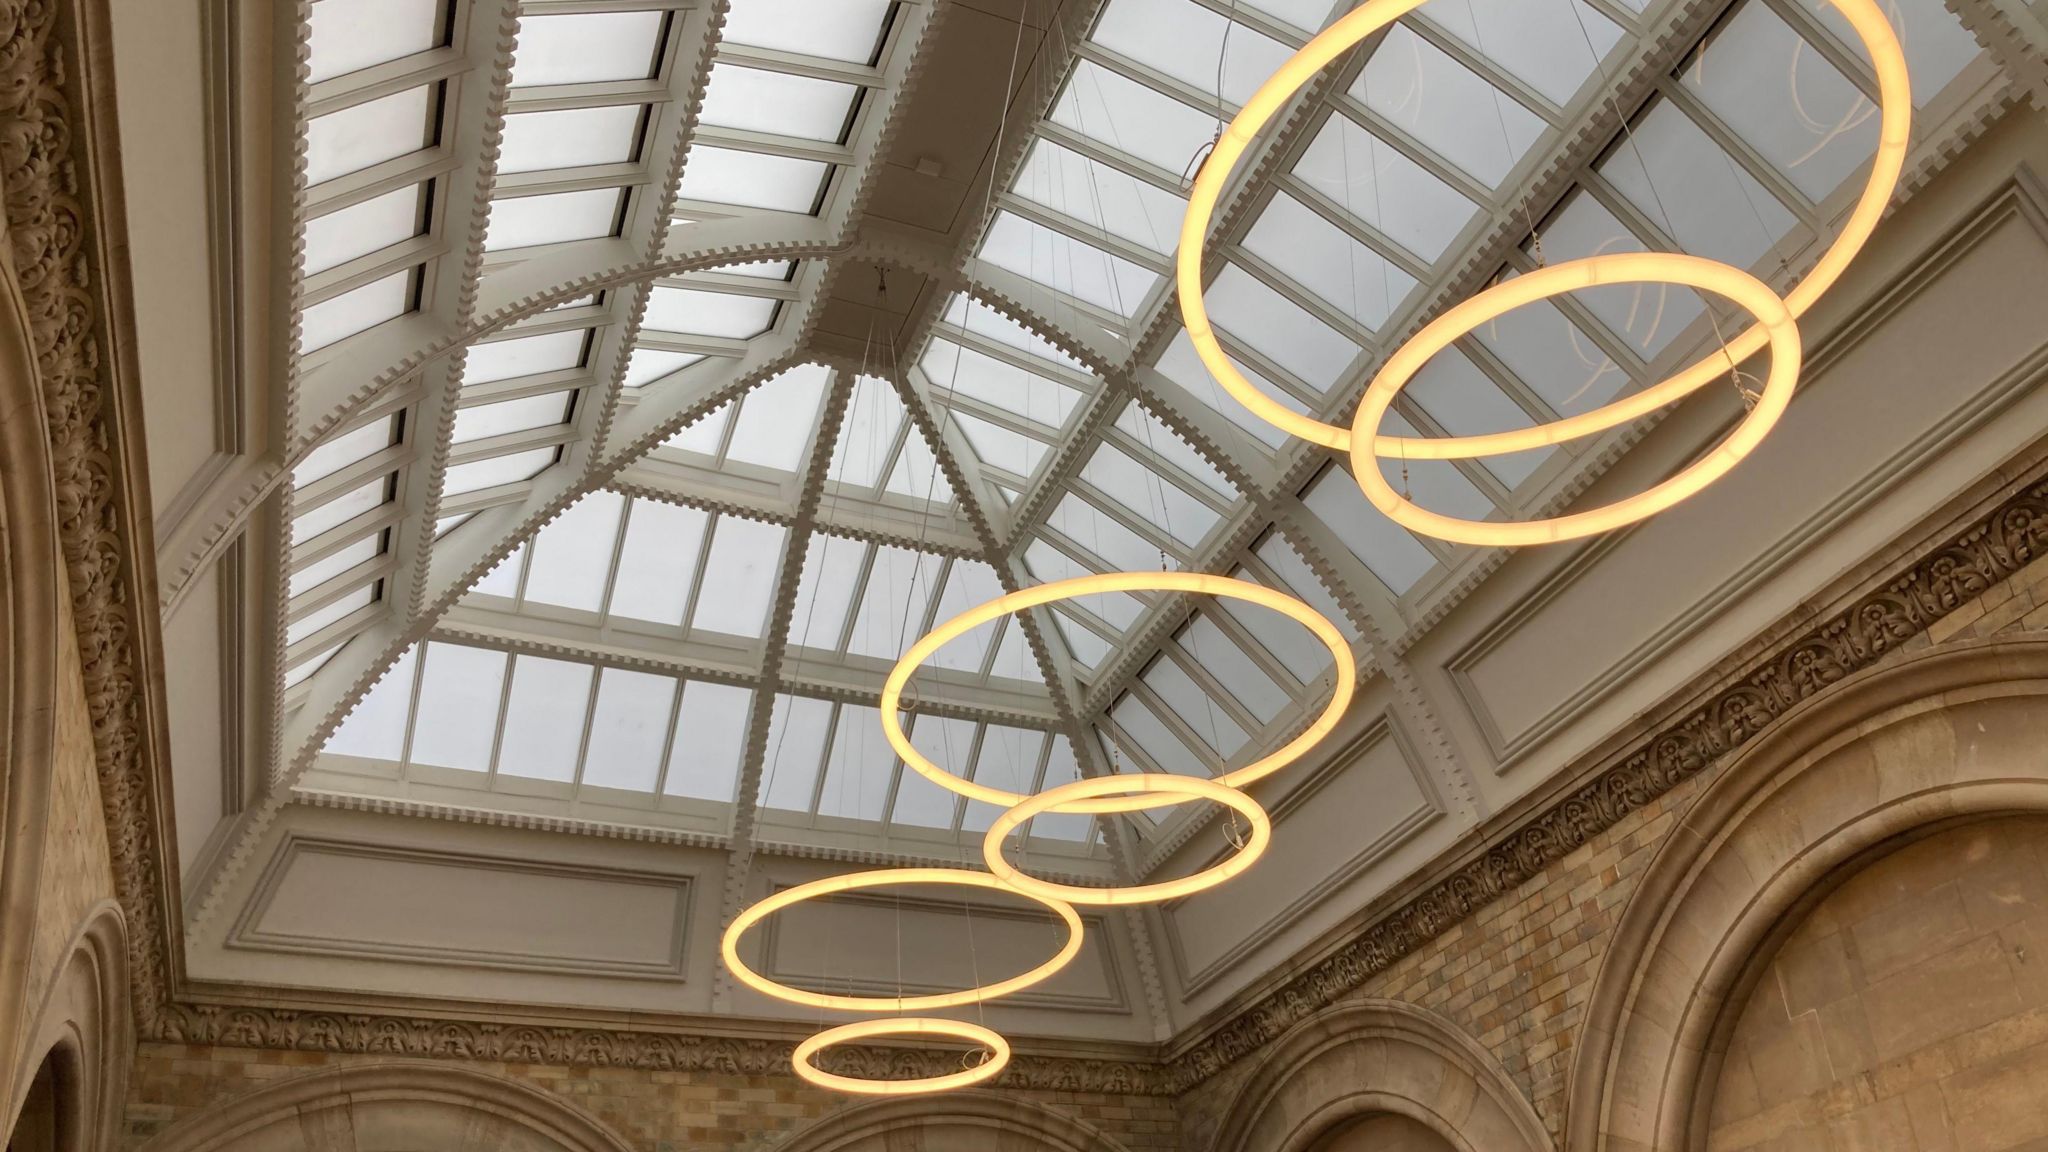 View of artistic lights in the shape of overlapping circles in the ceiling